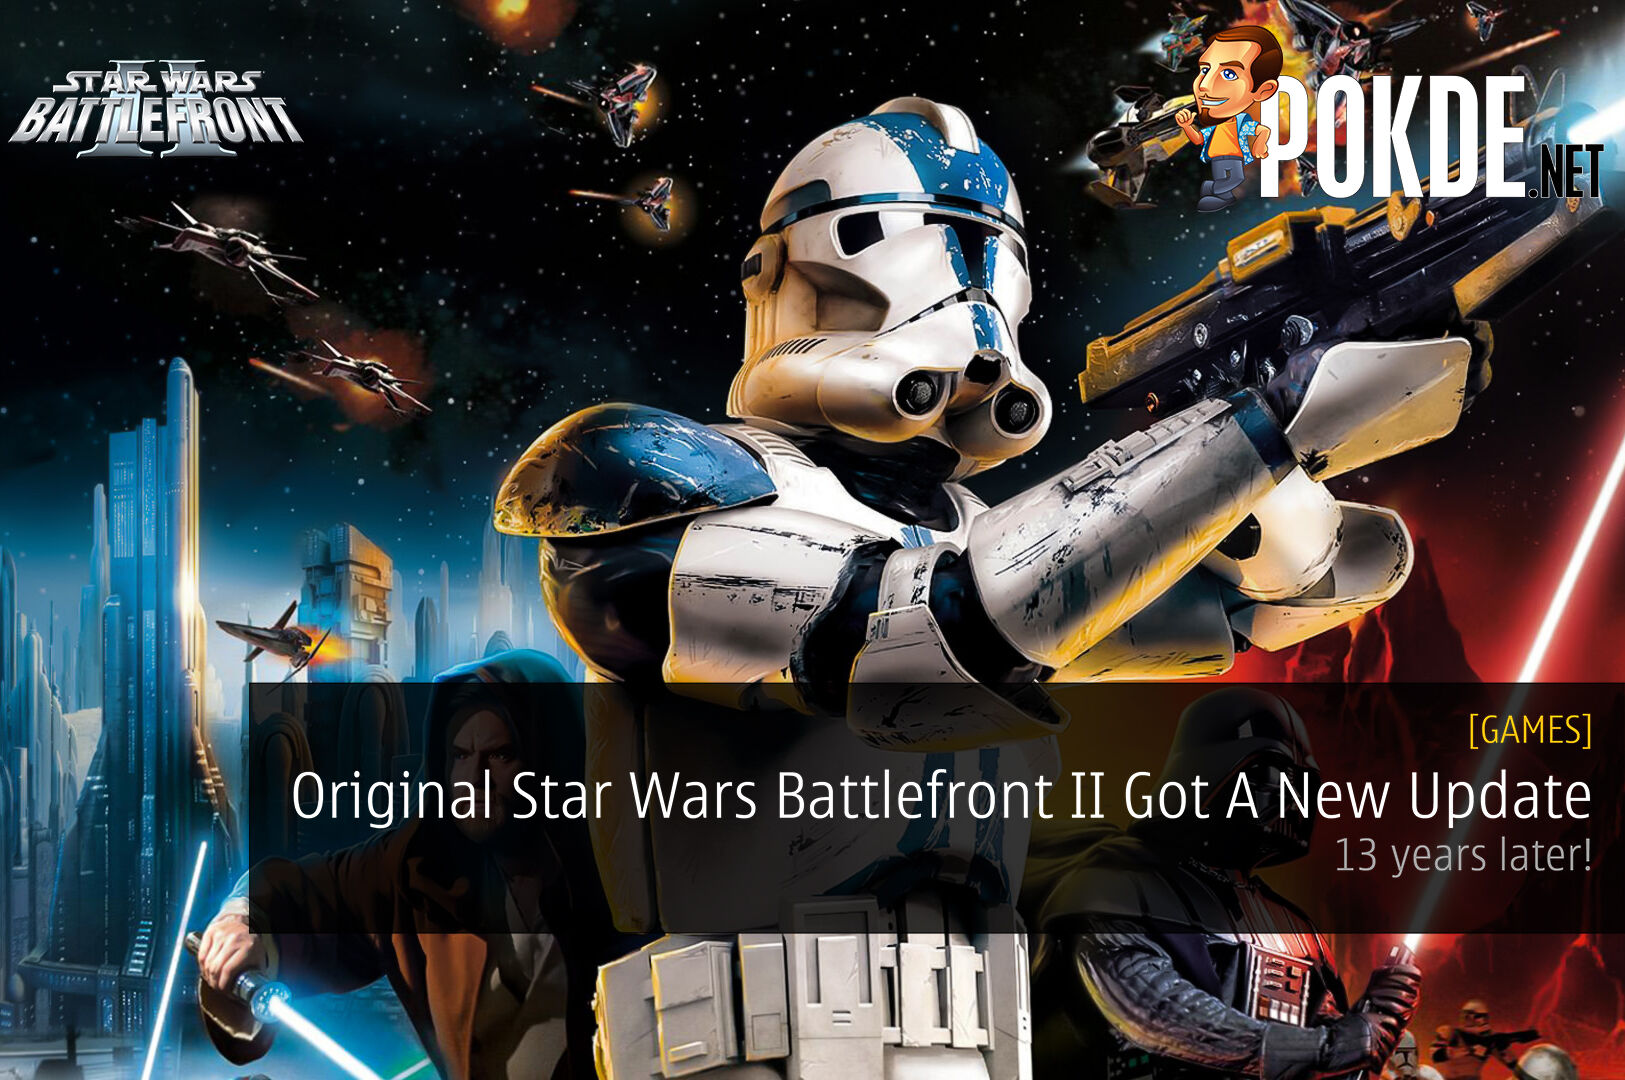 The Original Star Wars Battlefront II Just Got A New Update - 13 years later! 20